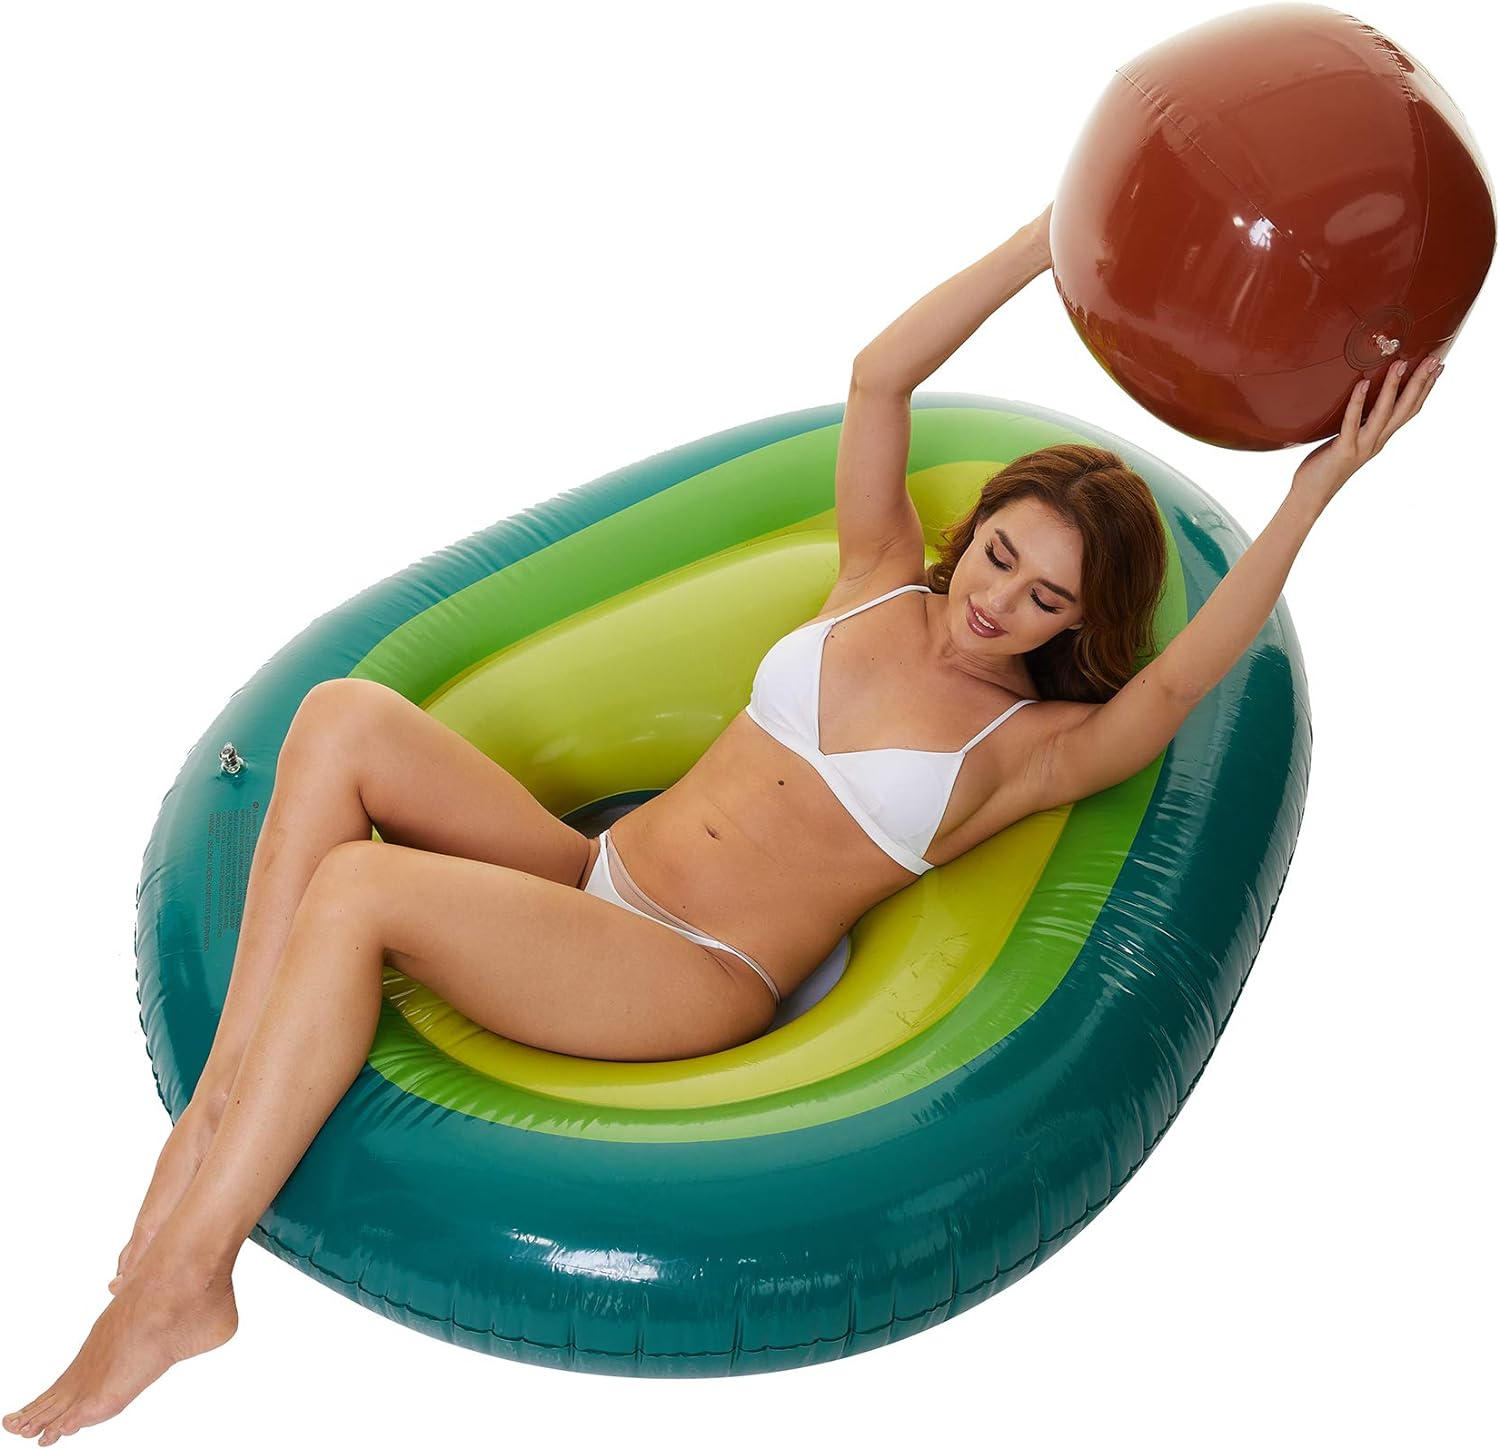 Avocado Pool Float for Adults Inflatable Toys Swimming Floating Bed Loungers the 